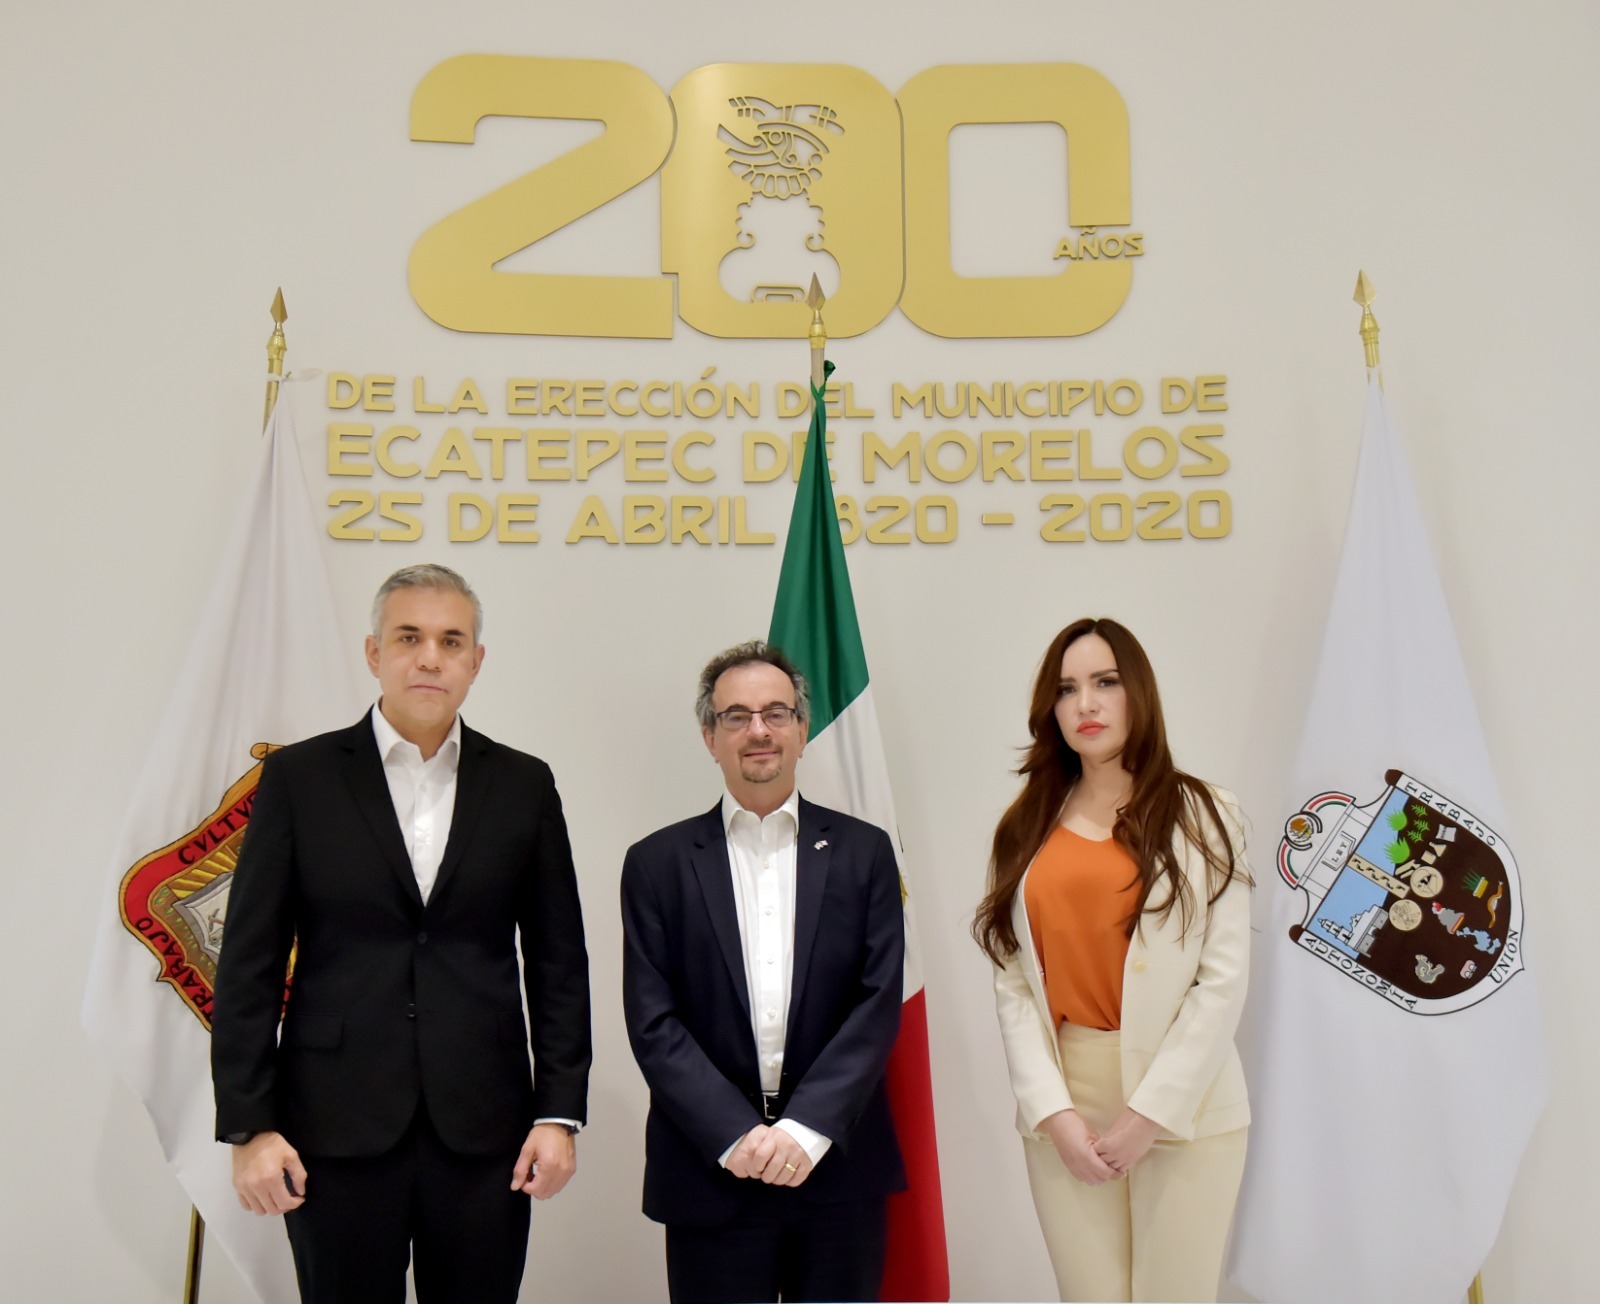 The mayor of Ecatepec and the British ambassador agreed to strengthen ties in the fields of education, climate change and technology